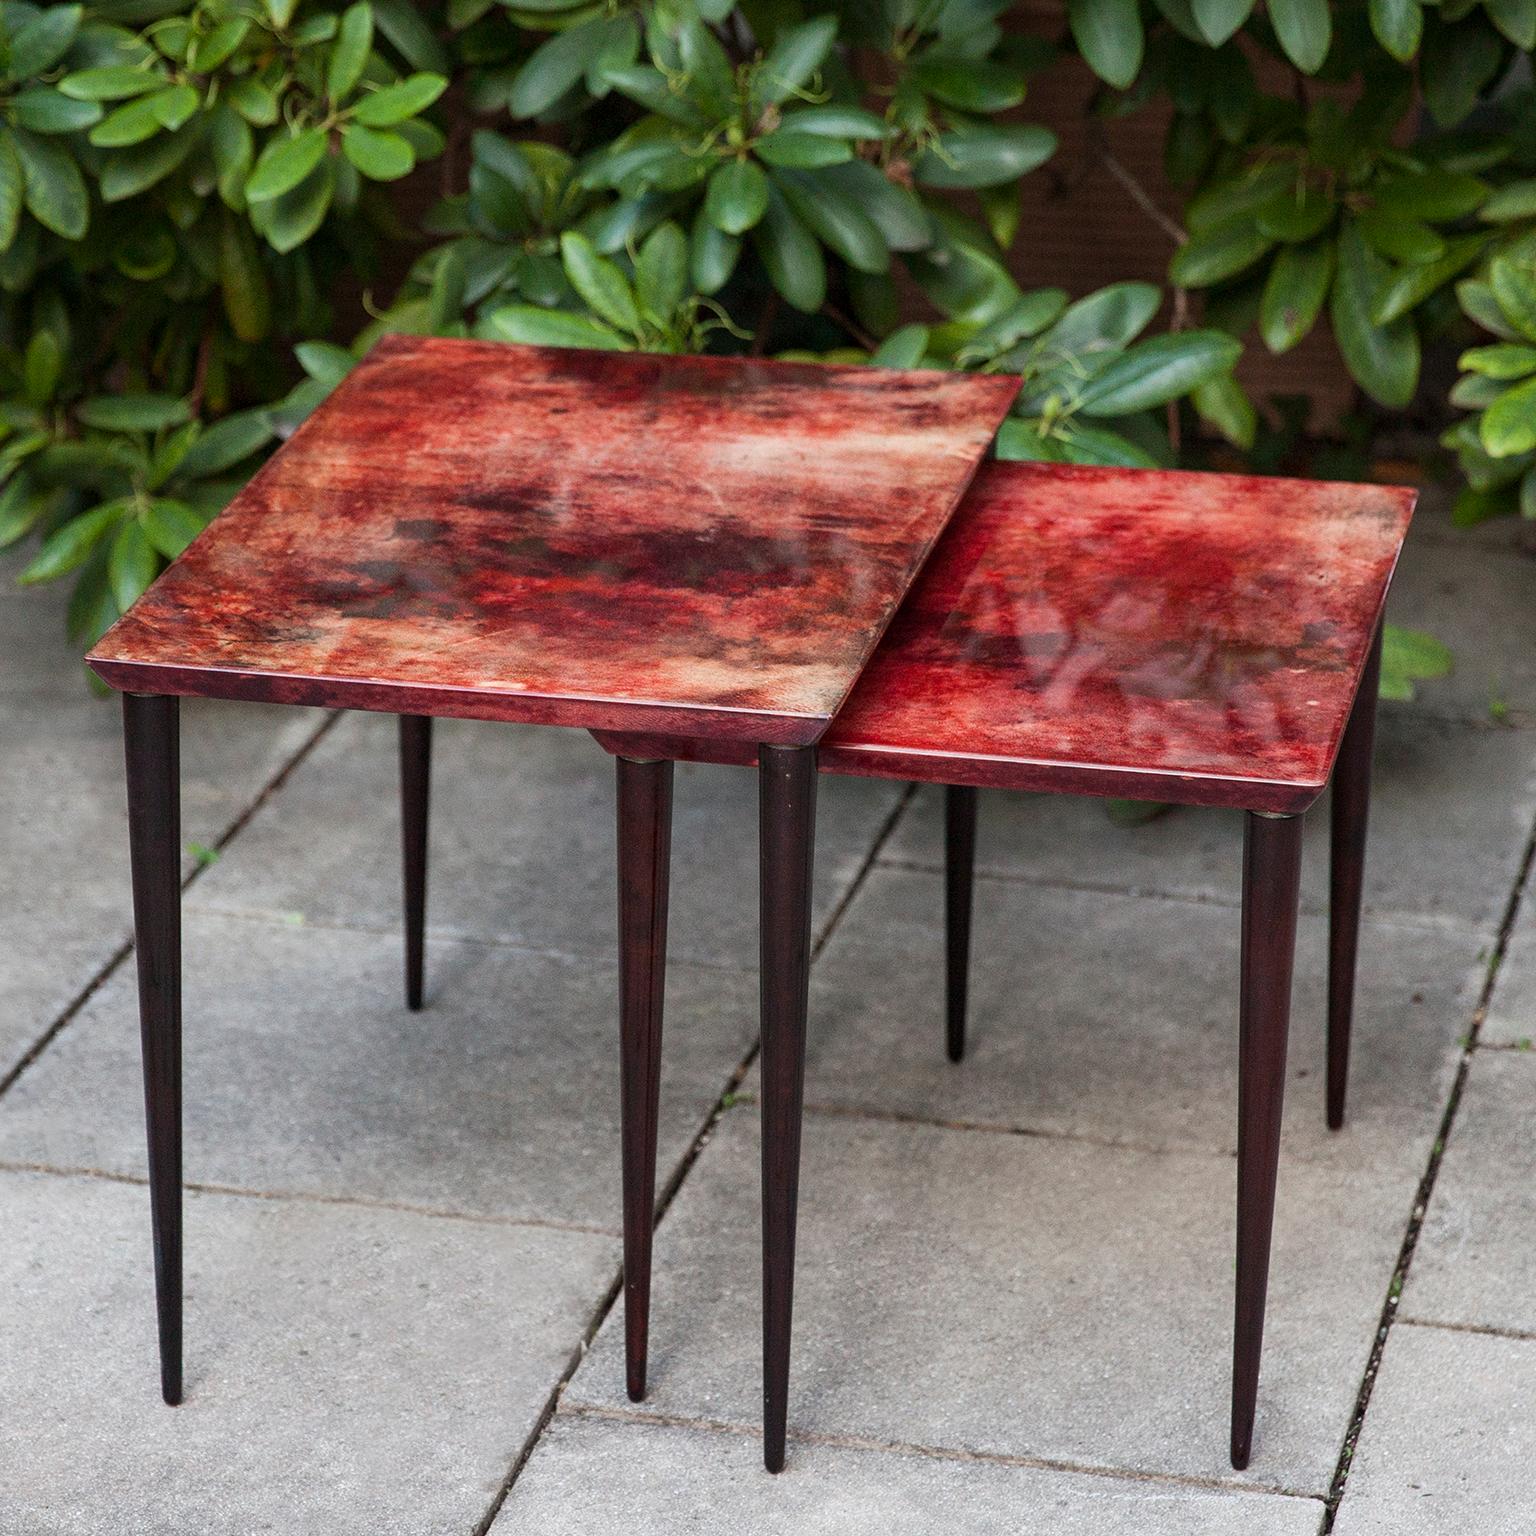 Set of two Aldo Tura nesting tables in lacquered red goatskin and mahogany legs this particular set was executed, circa 1960 and is in perfect condition. Along with artists like Piero Fornasetti and Carlo Bugatti, Aldo Tura (1909-1963) definitely